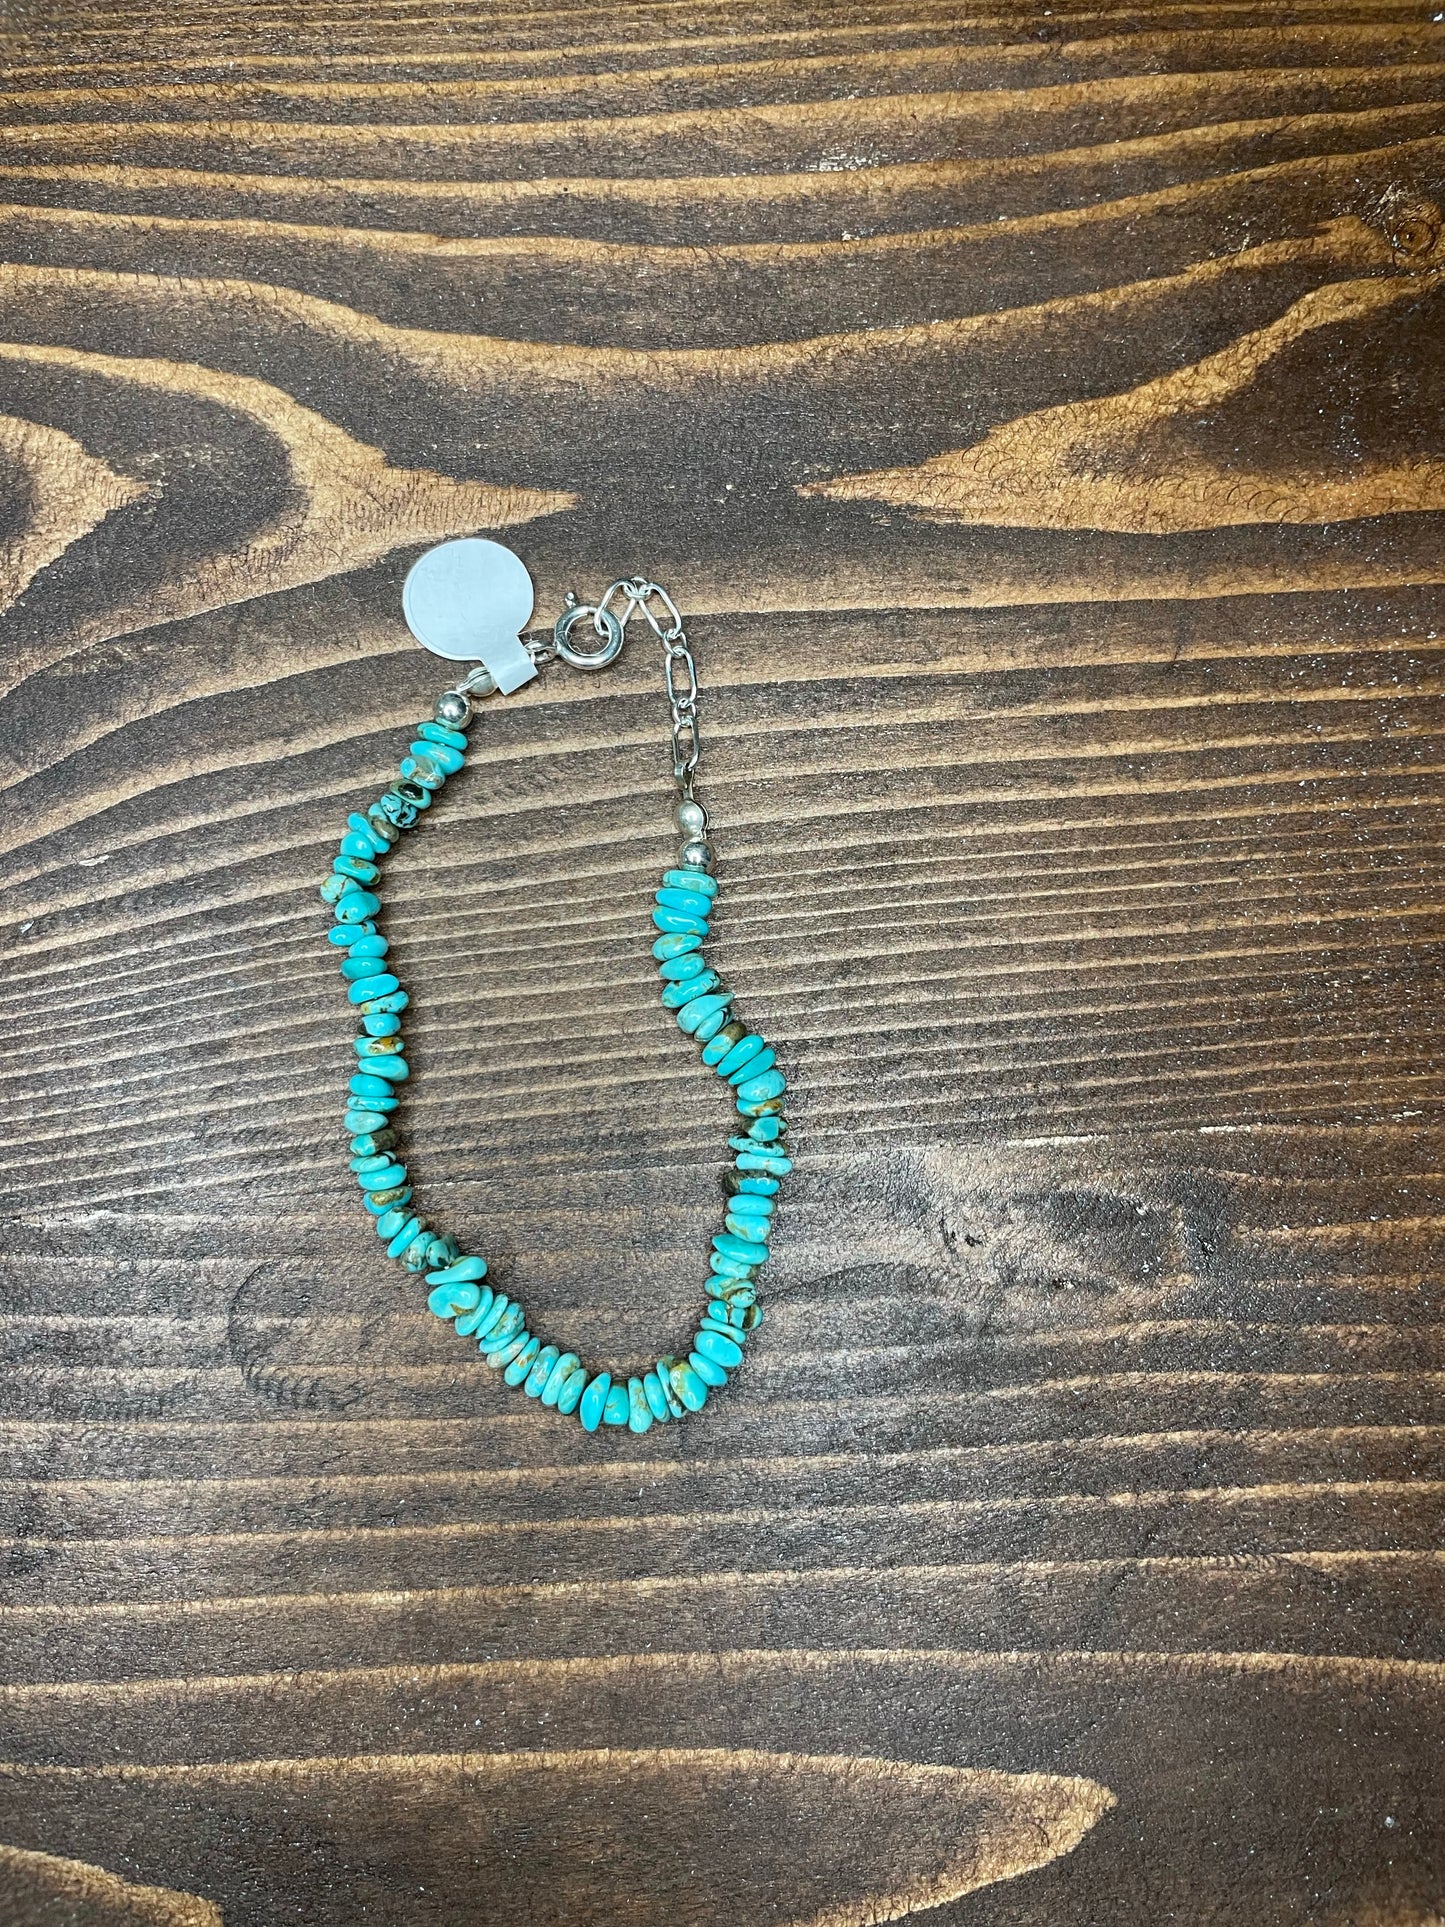 The Turquoise Nugget Bracelet